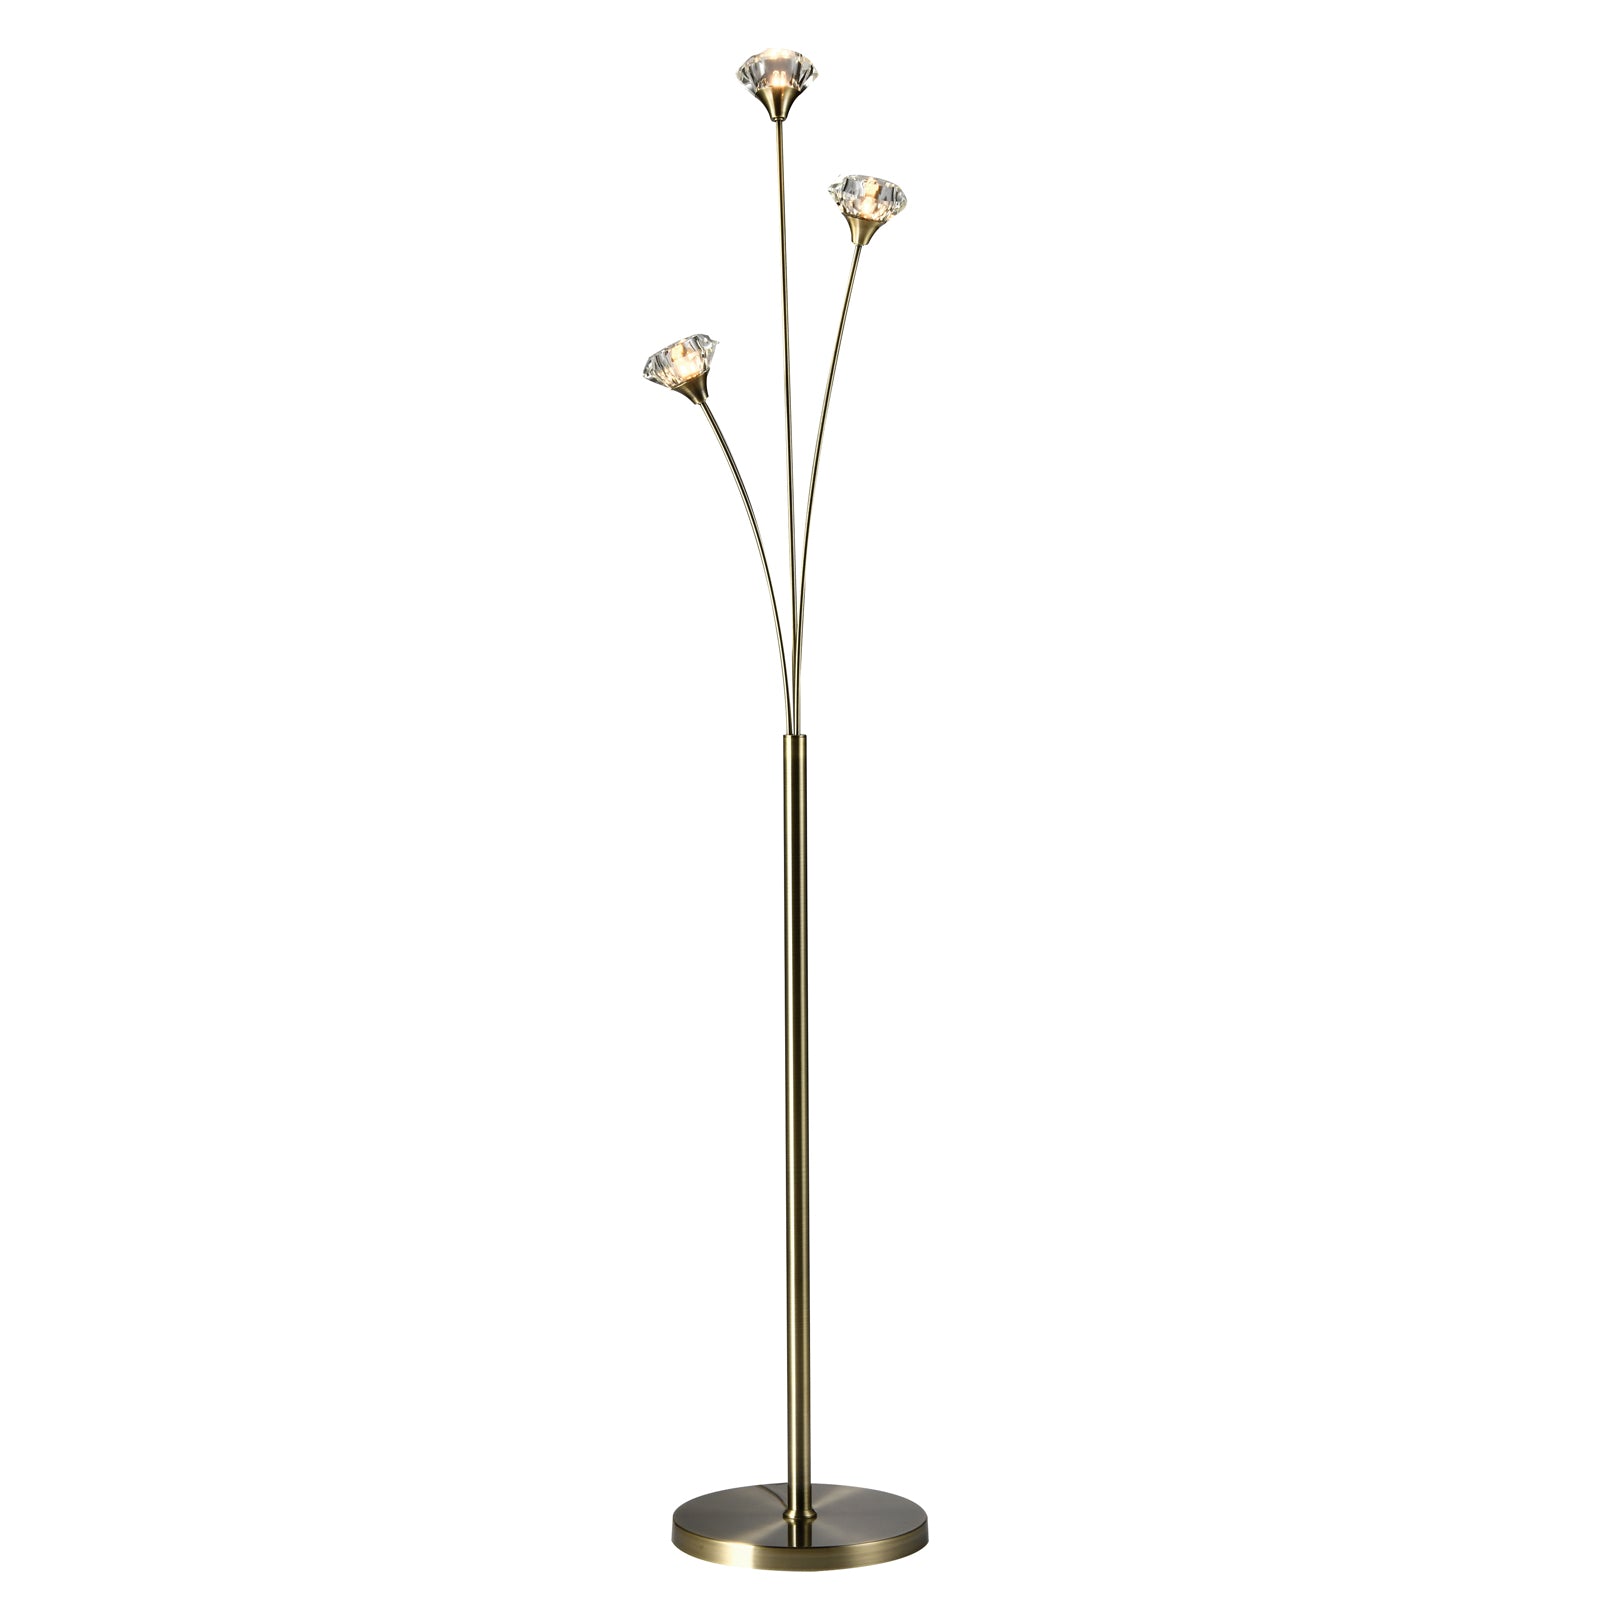 3 Light Floor Lamp, UK Plug Included, Antique Brass Finish, Clear Glass Shades